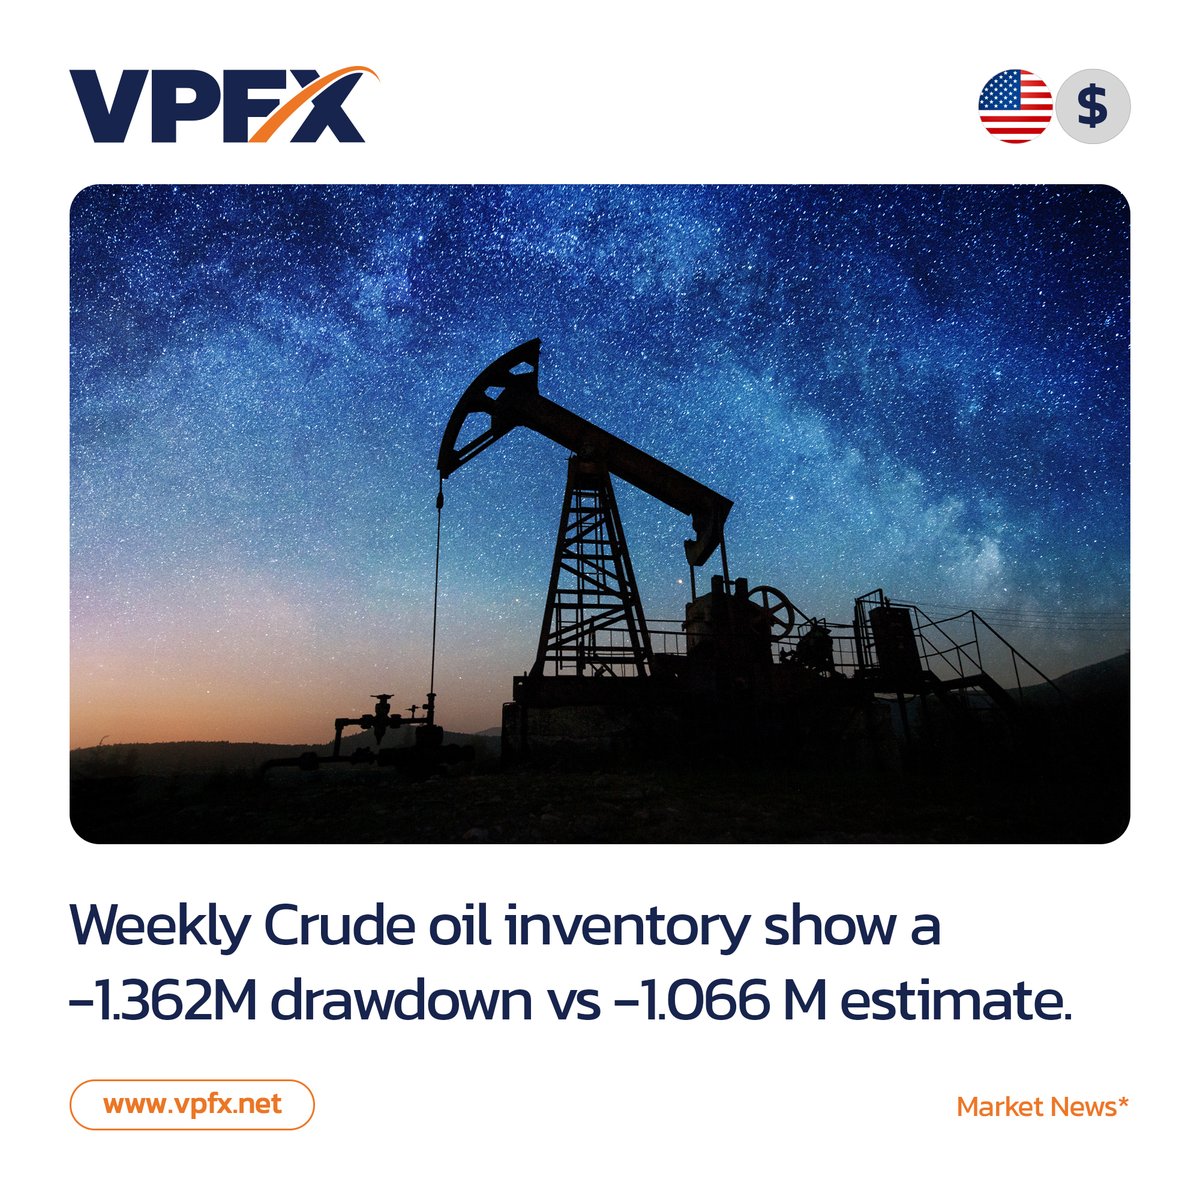 The Energy Information Administration's (EIA) Crude Oil Inventories measures the weekly change in the number of barrels of commercial crude oil held by US firms. #vpfx #usa🇺🇸 #crudeoil #dollar #forexnews #forexmarket #forexbroker